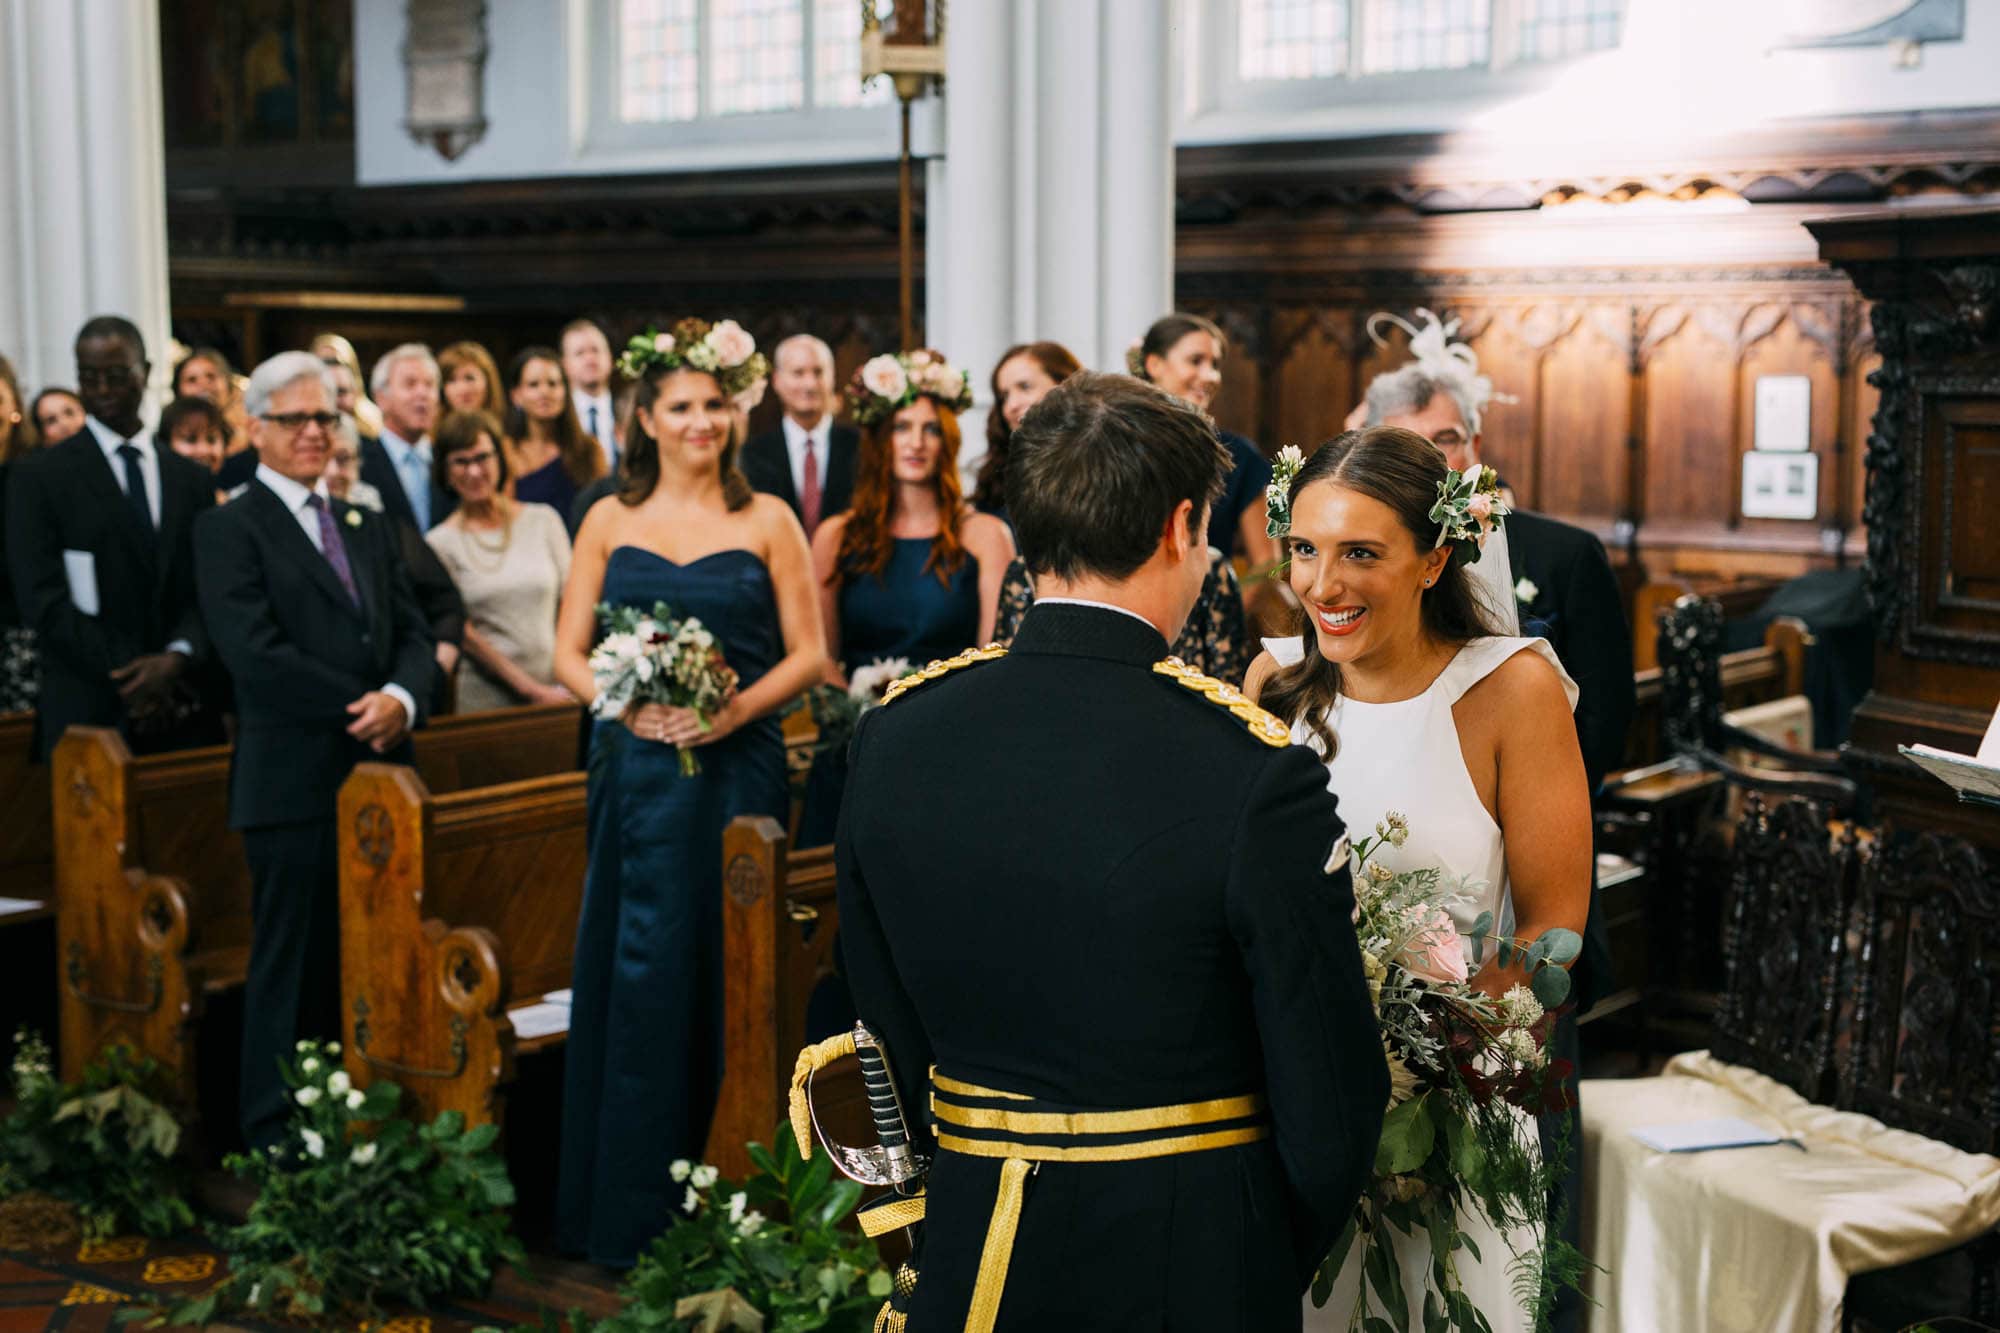 bride smiles as she meets groom in church